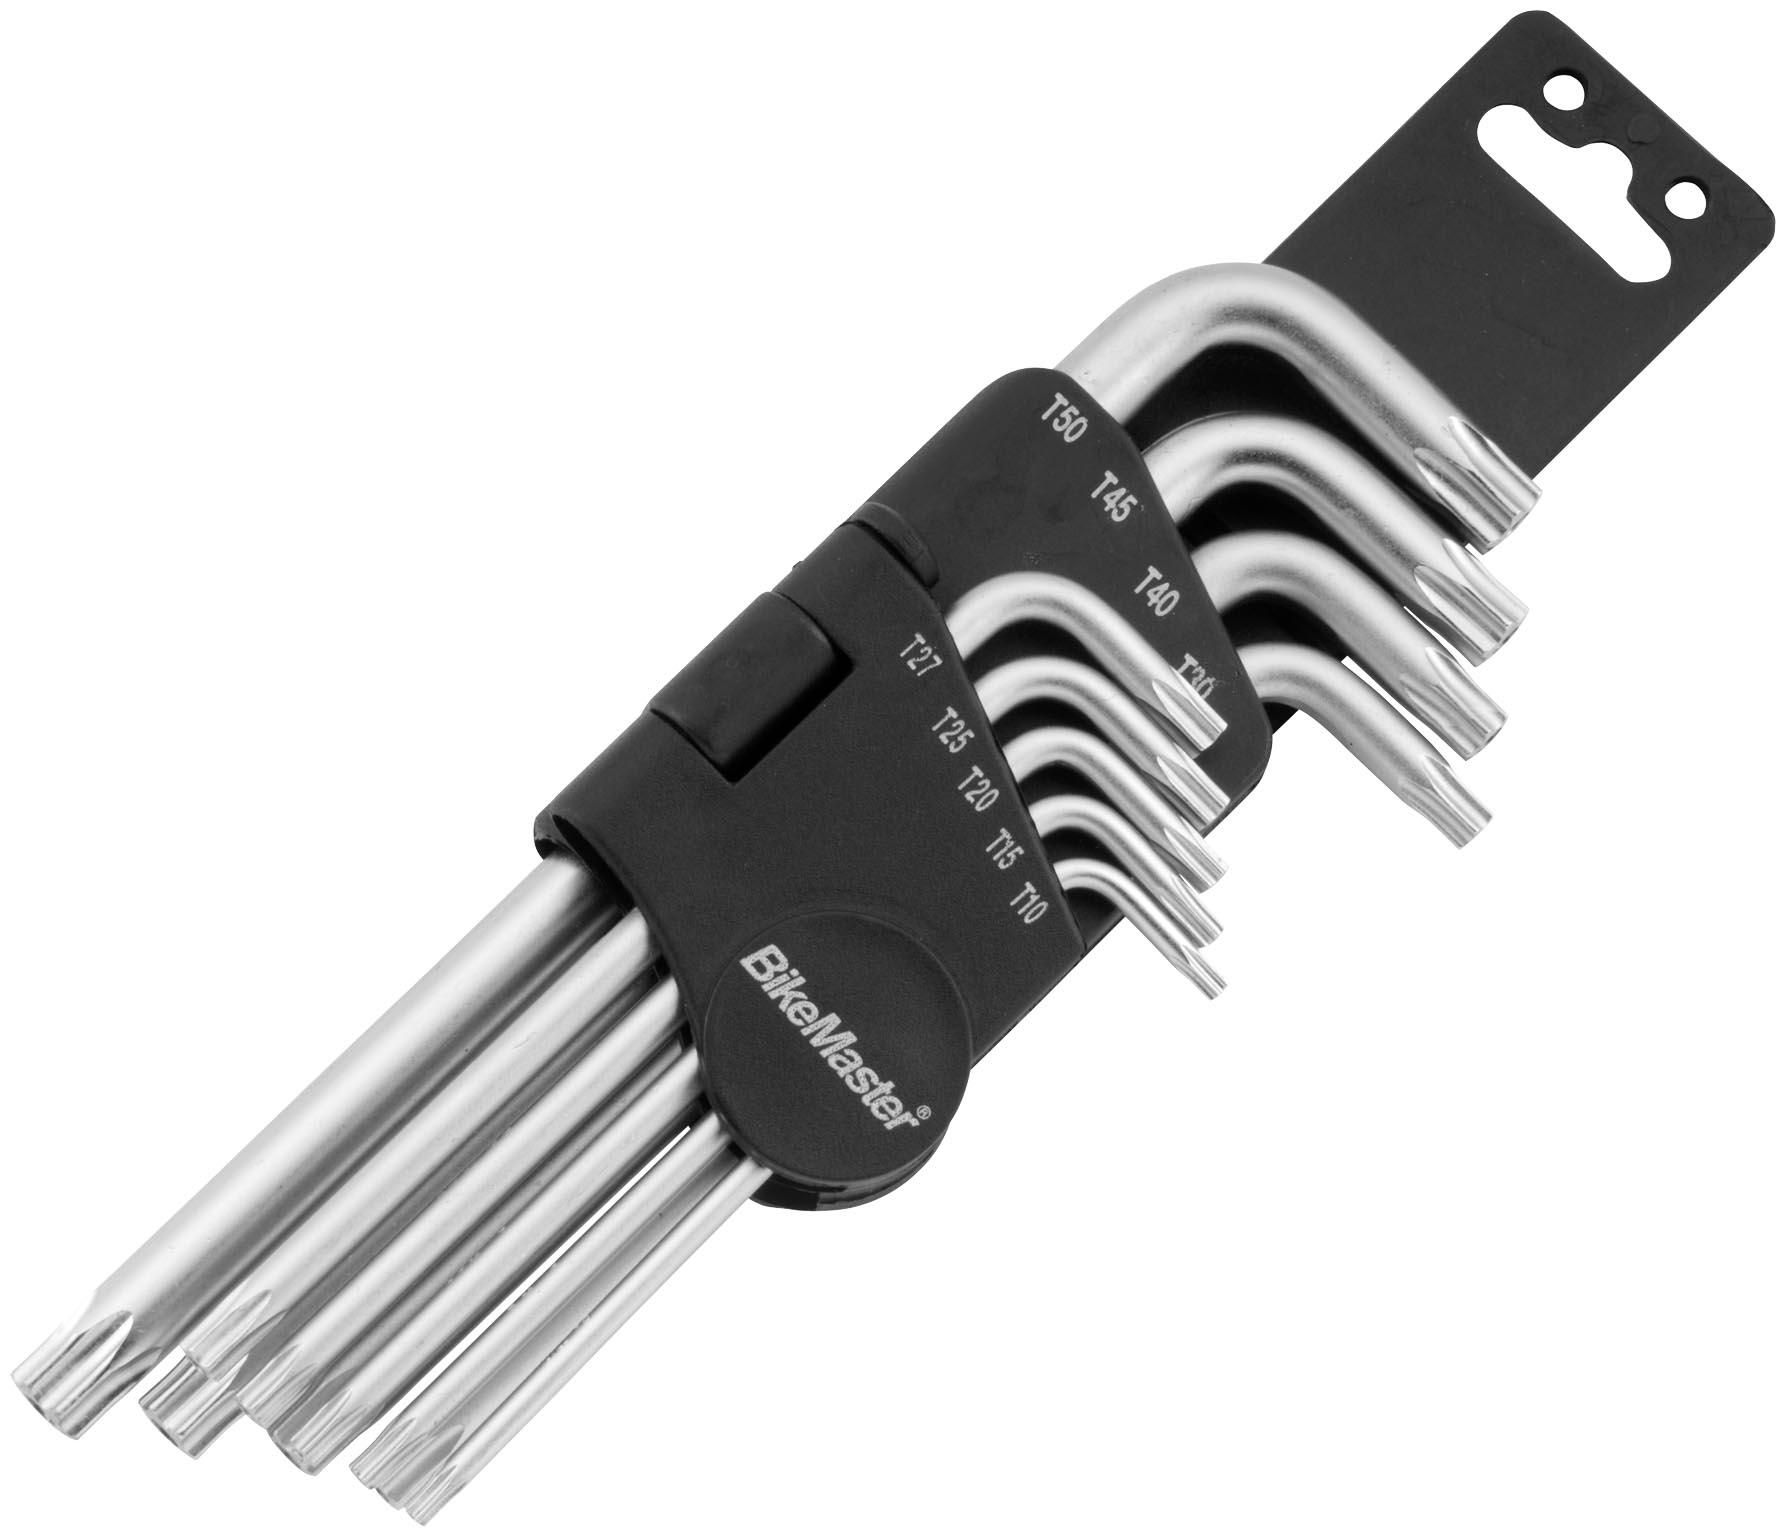 3W5V-BIKEMASTER-17-A-162 9-Piece Security S-Torx Wrench Set and Holder